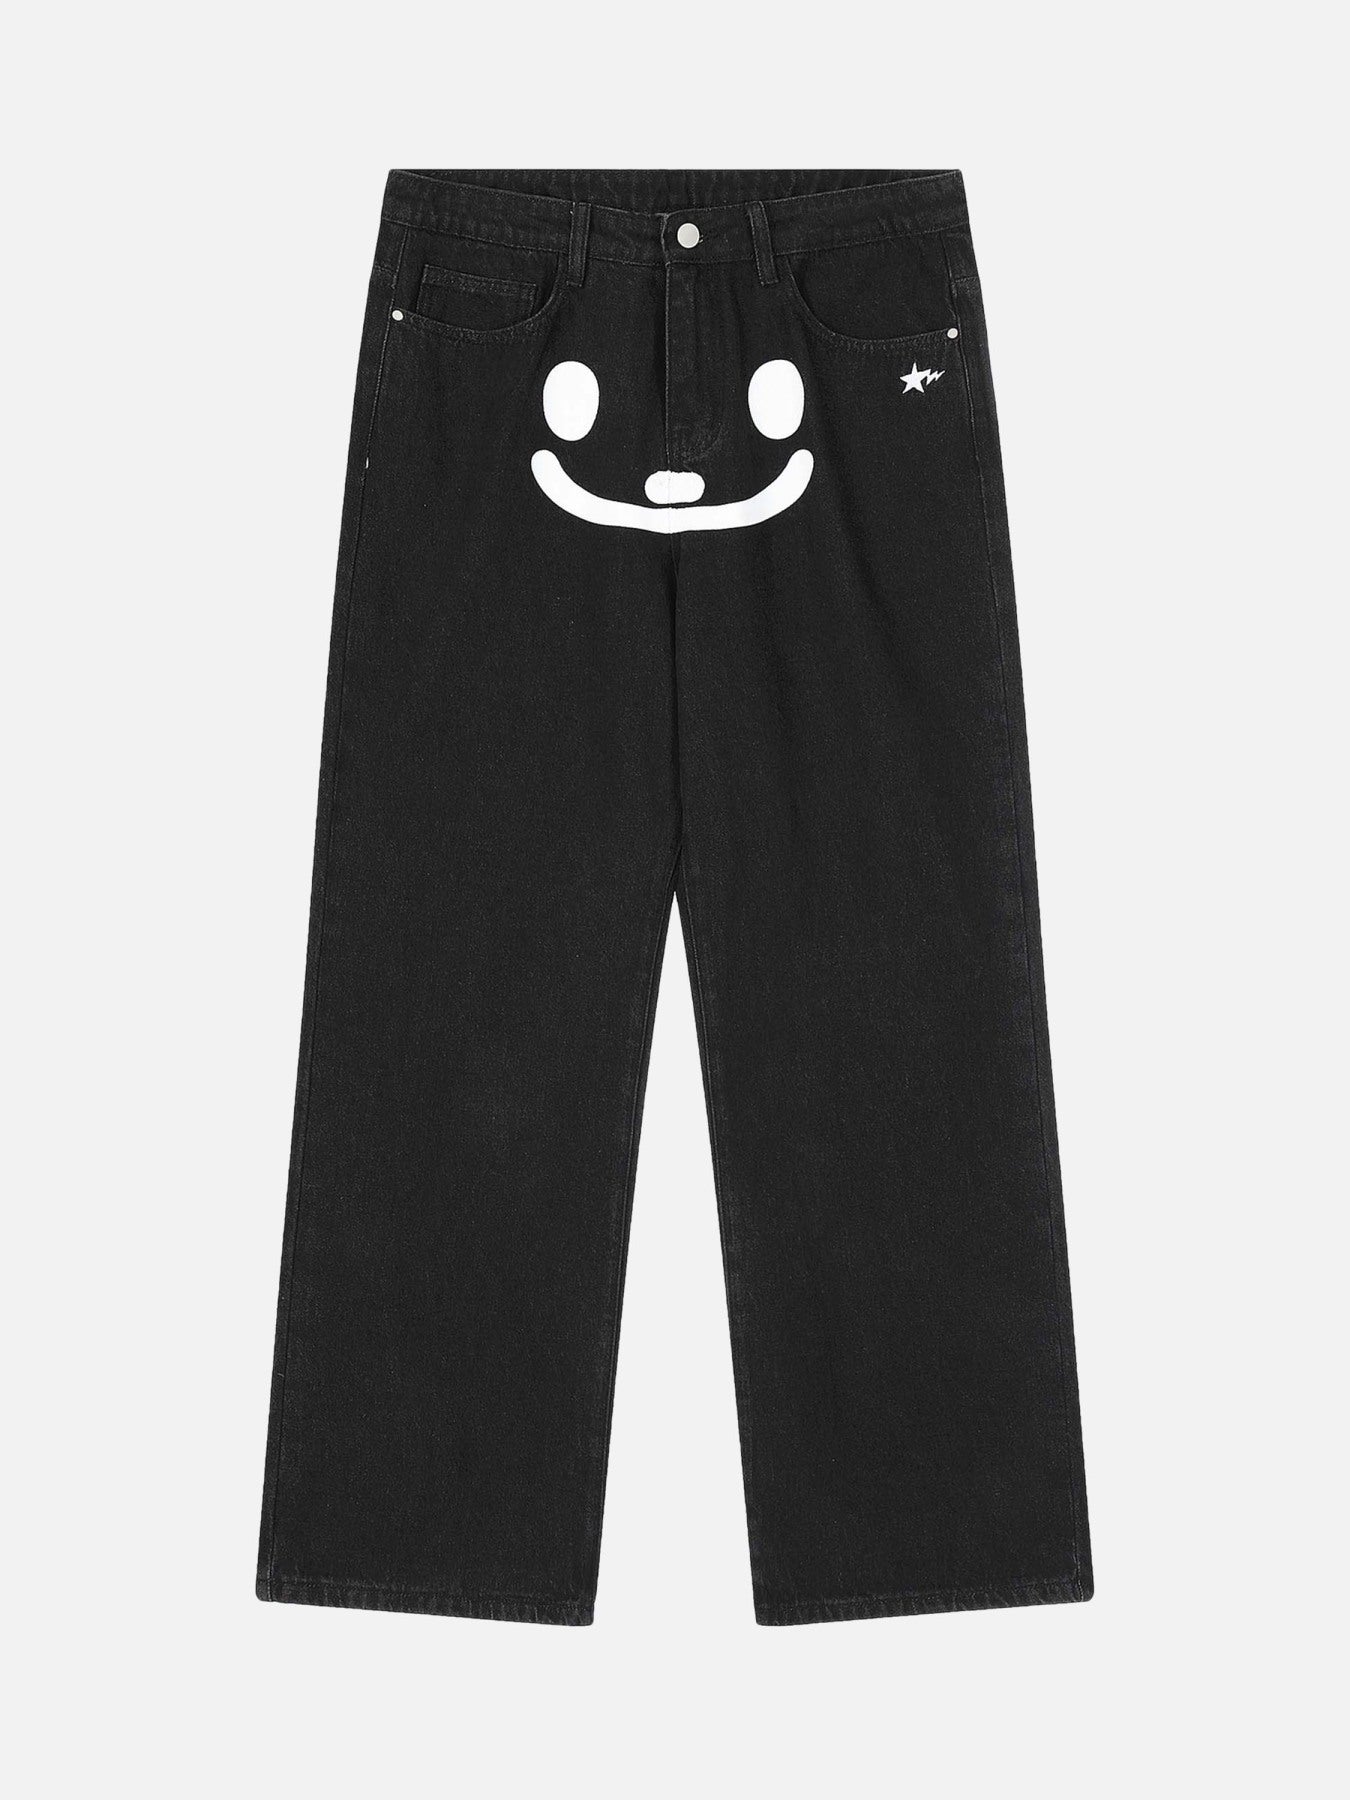 Thesupermade Personality Smiley Face Printed Jeans - 1978